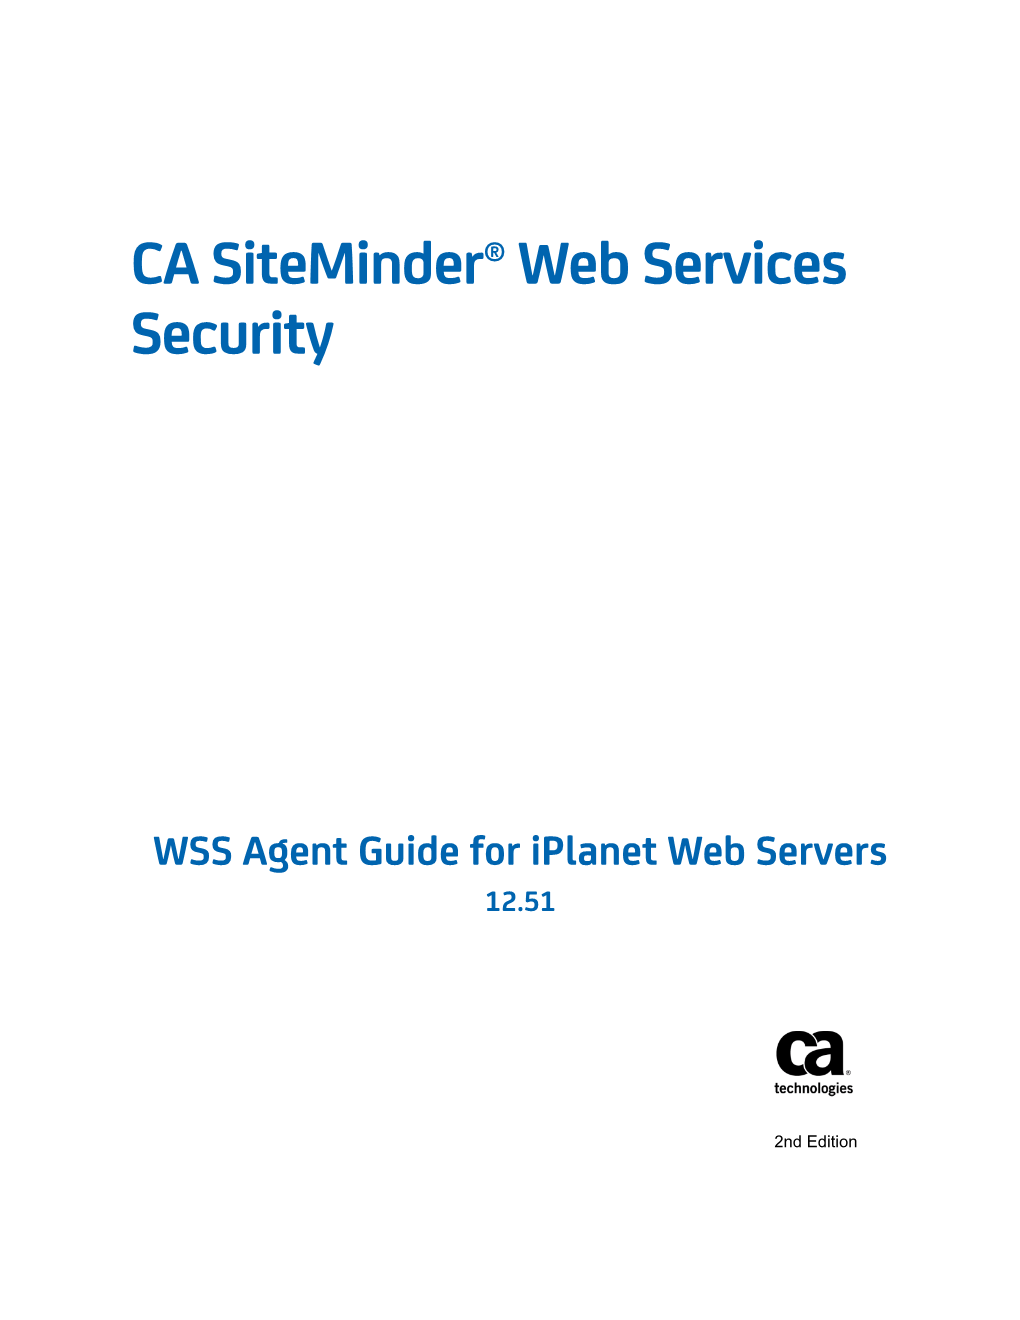 WSS Agent Guide for Iplanet Web Servers 12.51